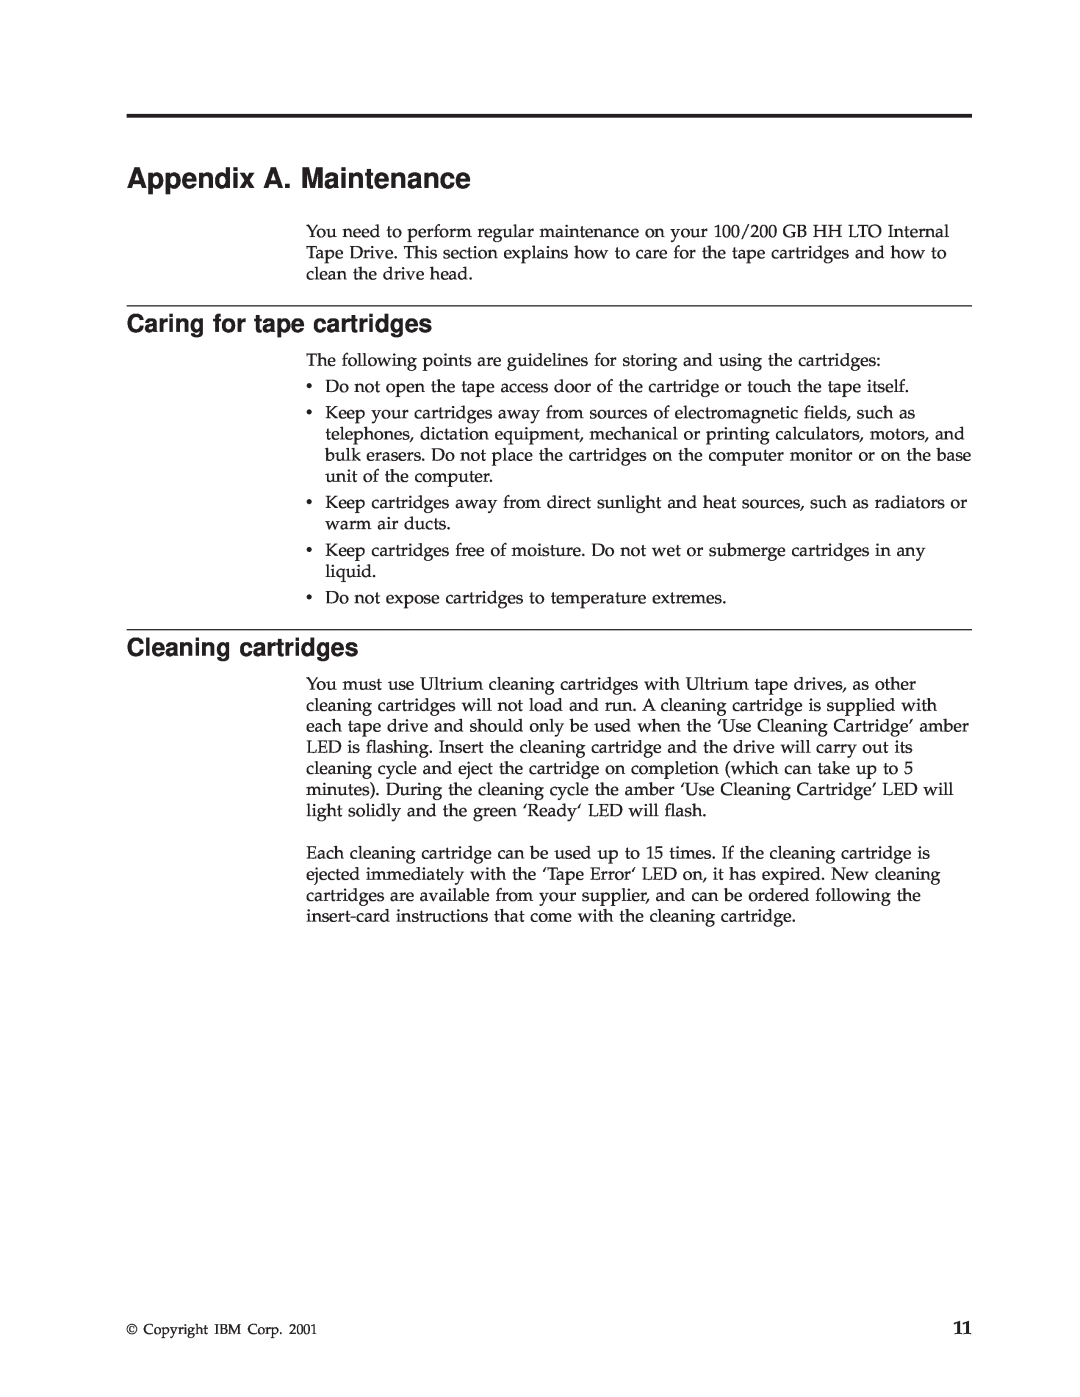 IBM HH LTO manual Appendix A. Maintenance, Caring for tape cartridges, Cleaning cartridges 